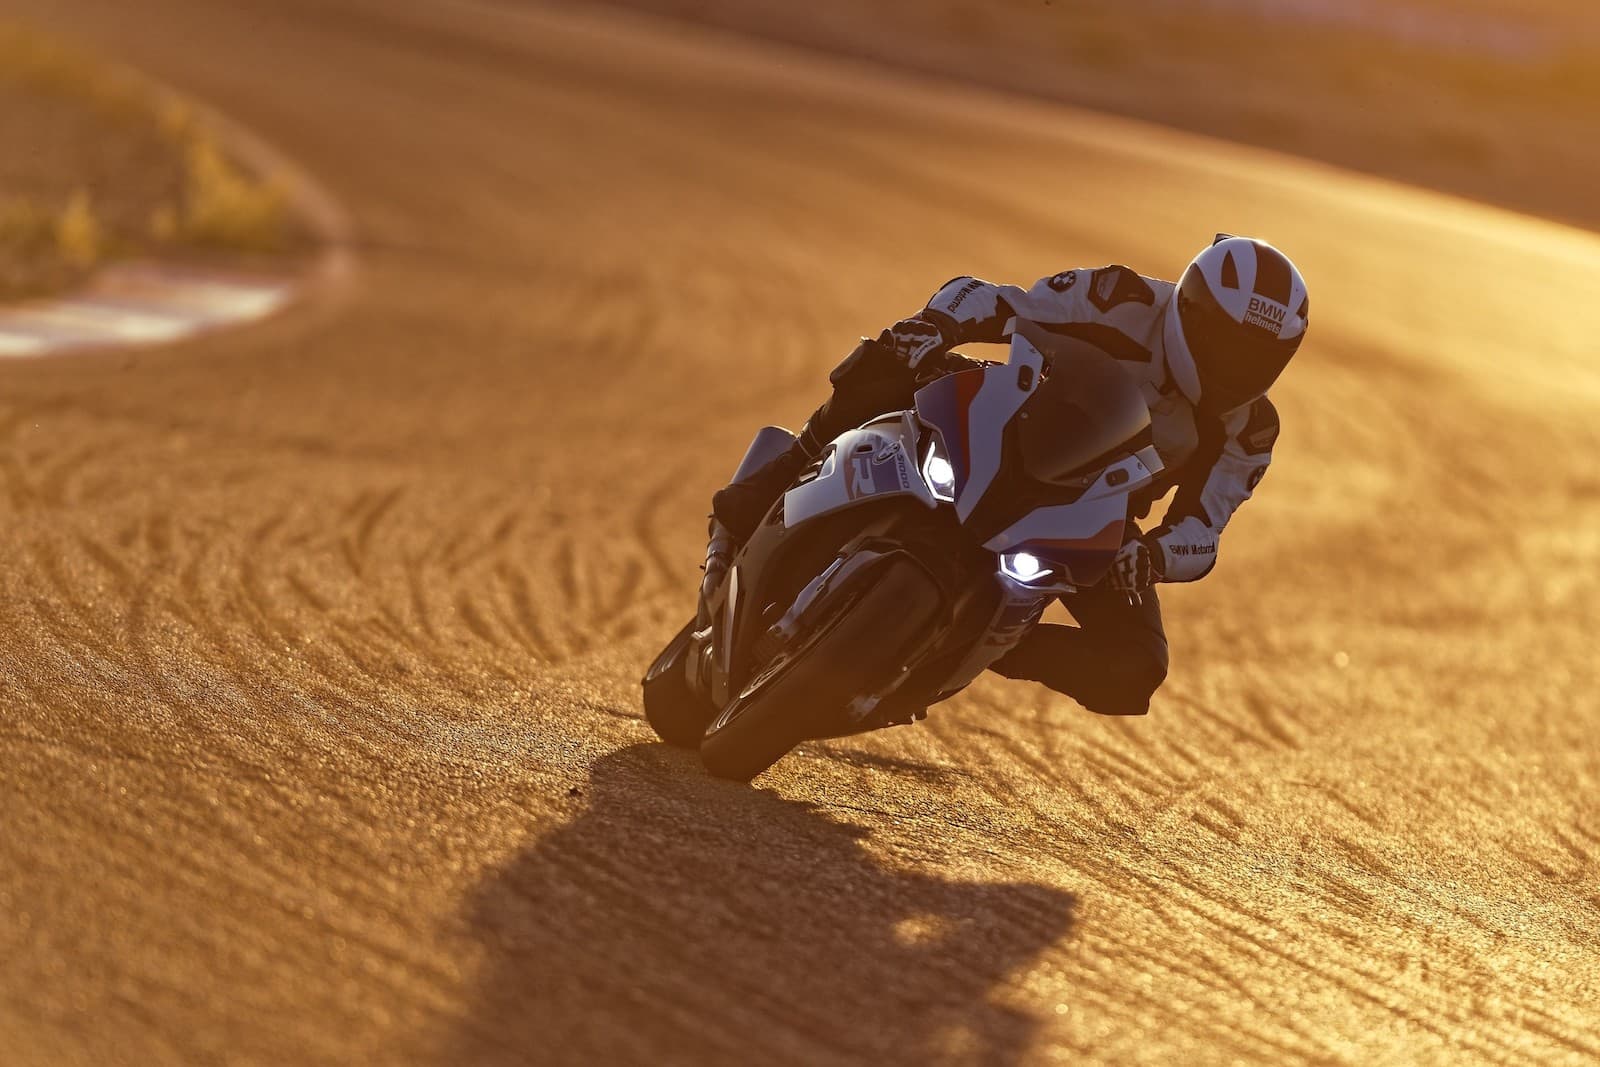 2019 2020 BMW S 1000 RR on track at sunset